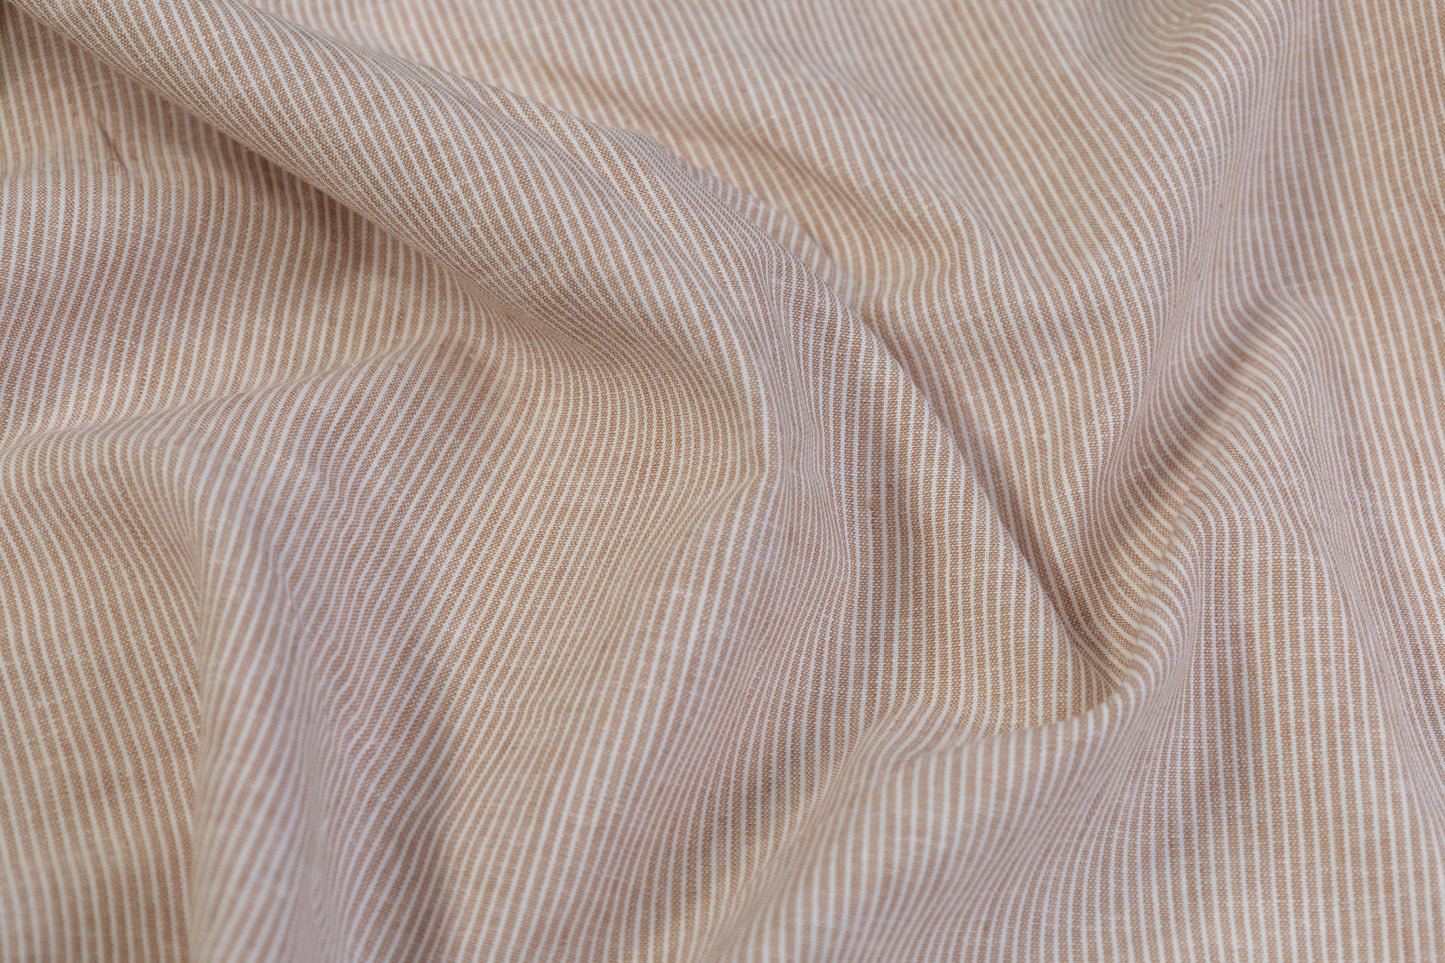 Hairline Striped Printed Italian Linen - Taupe / White